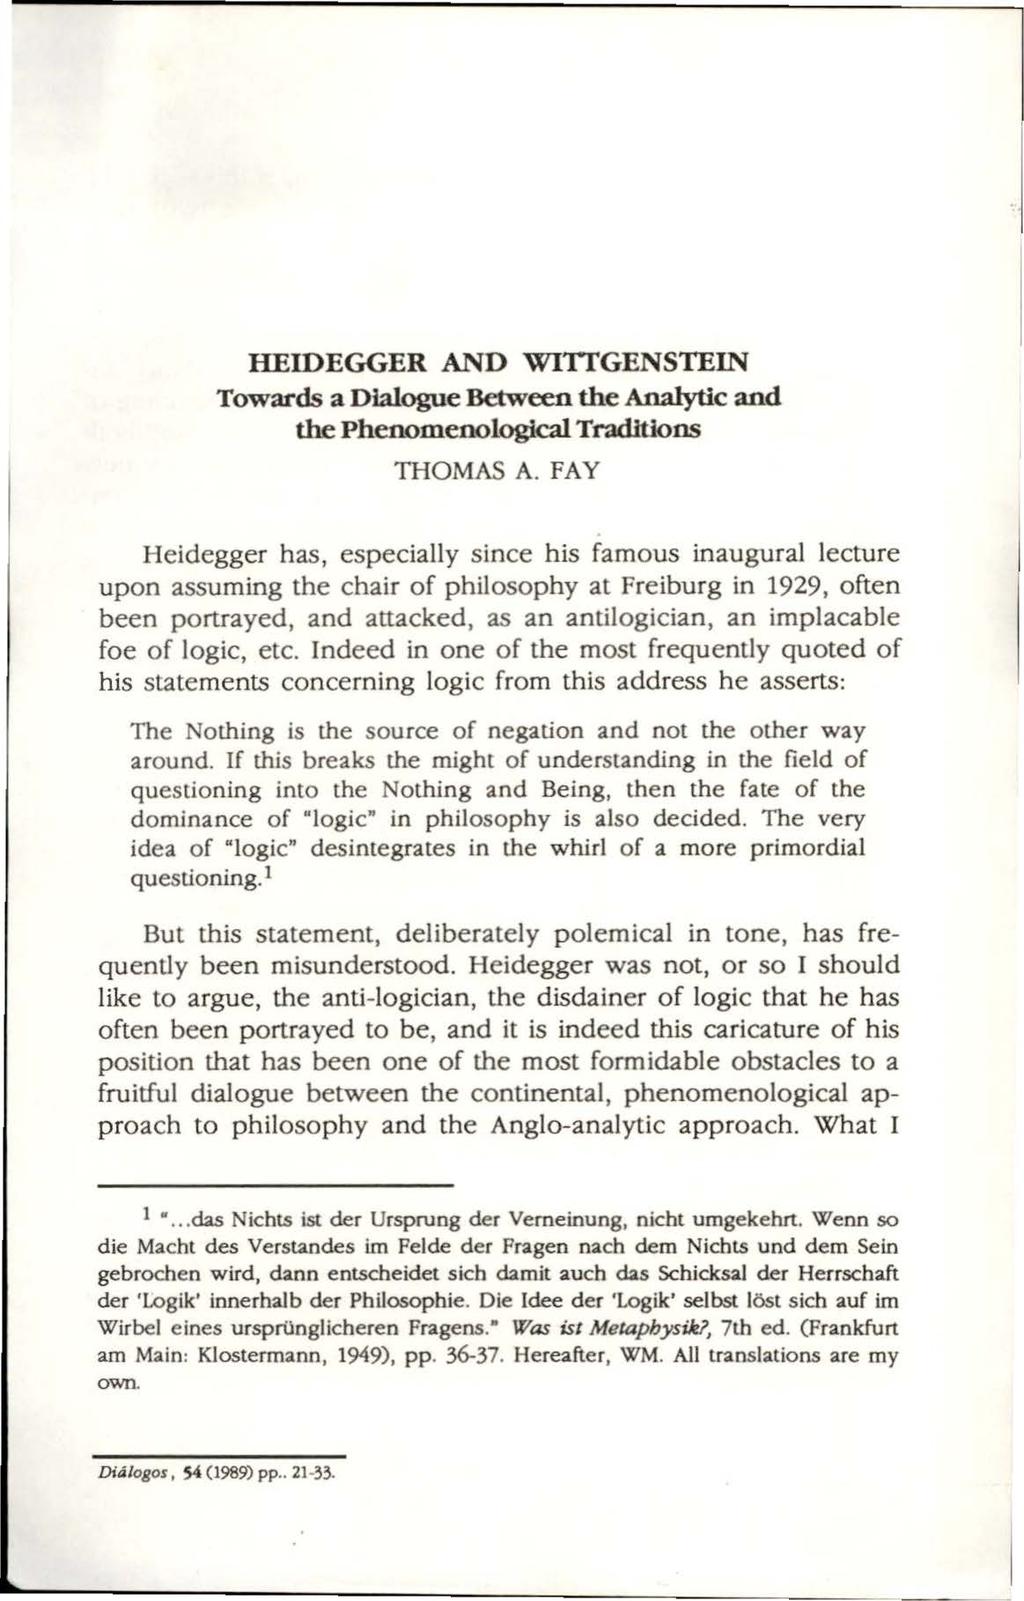 HEIDEGGER AND WITIGENSTEIN Towards a Dialogue Between the Analytic and the Phenomenological Traditions THOMAS A.